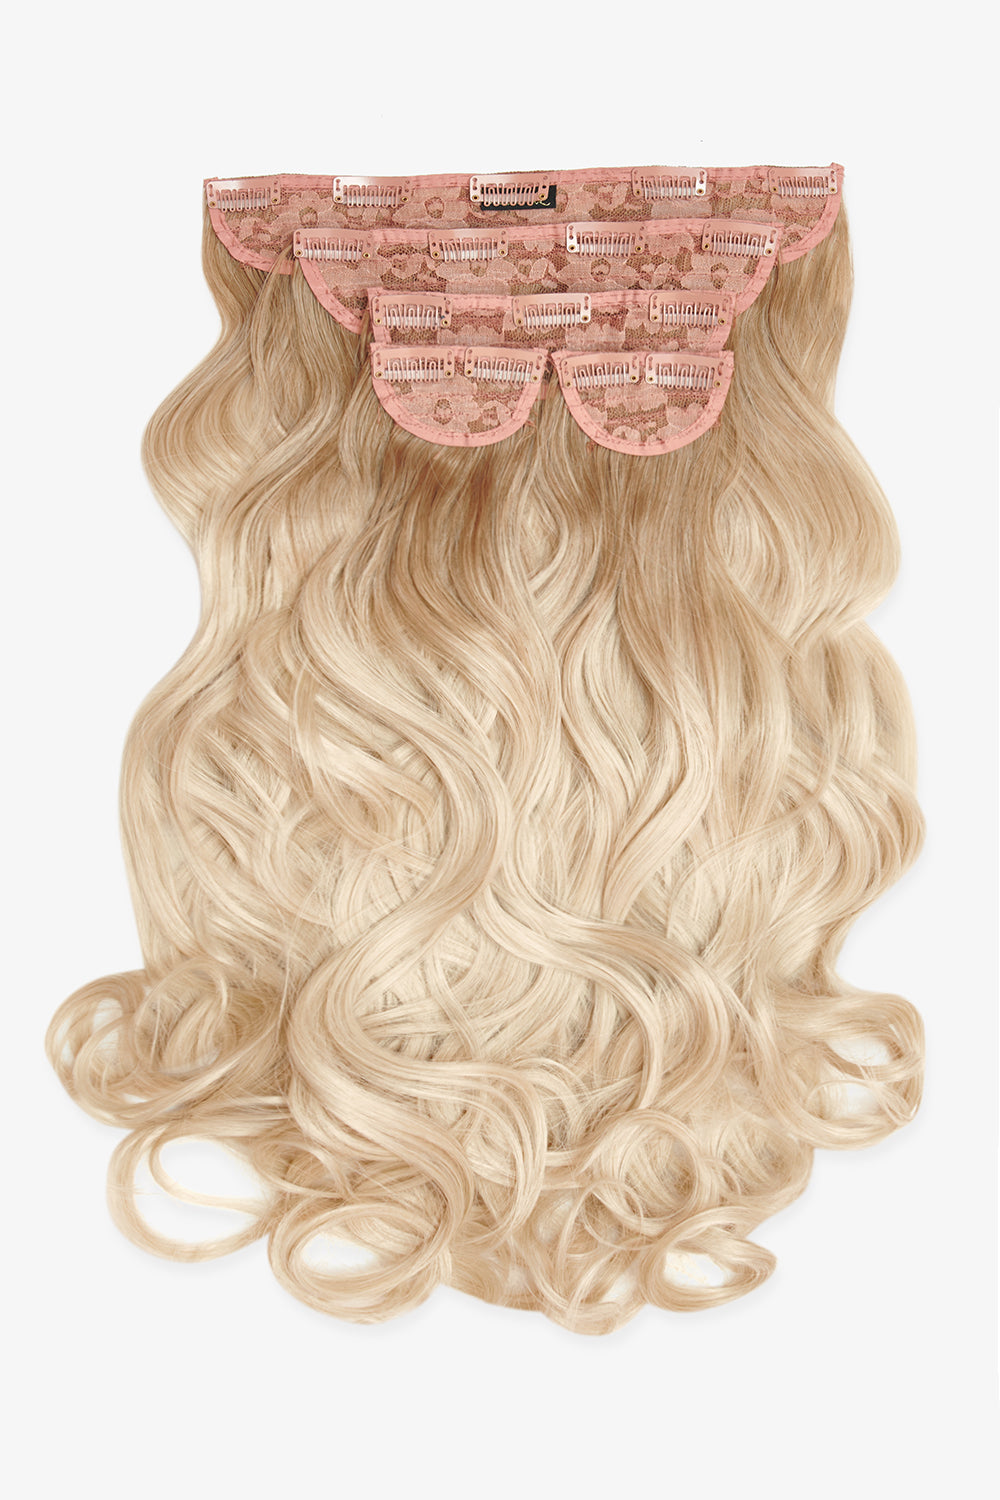 Super Thick 22" 5 Piece Curly Clip In Hair Extensions - Rooted Light Blonde